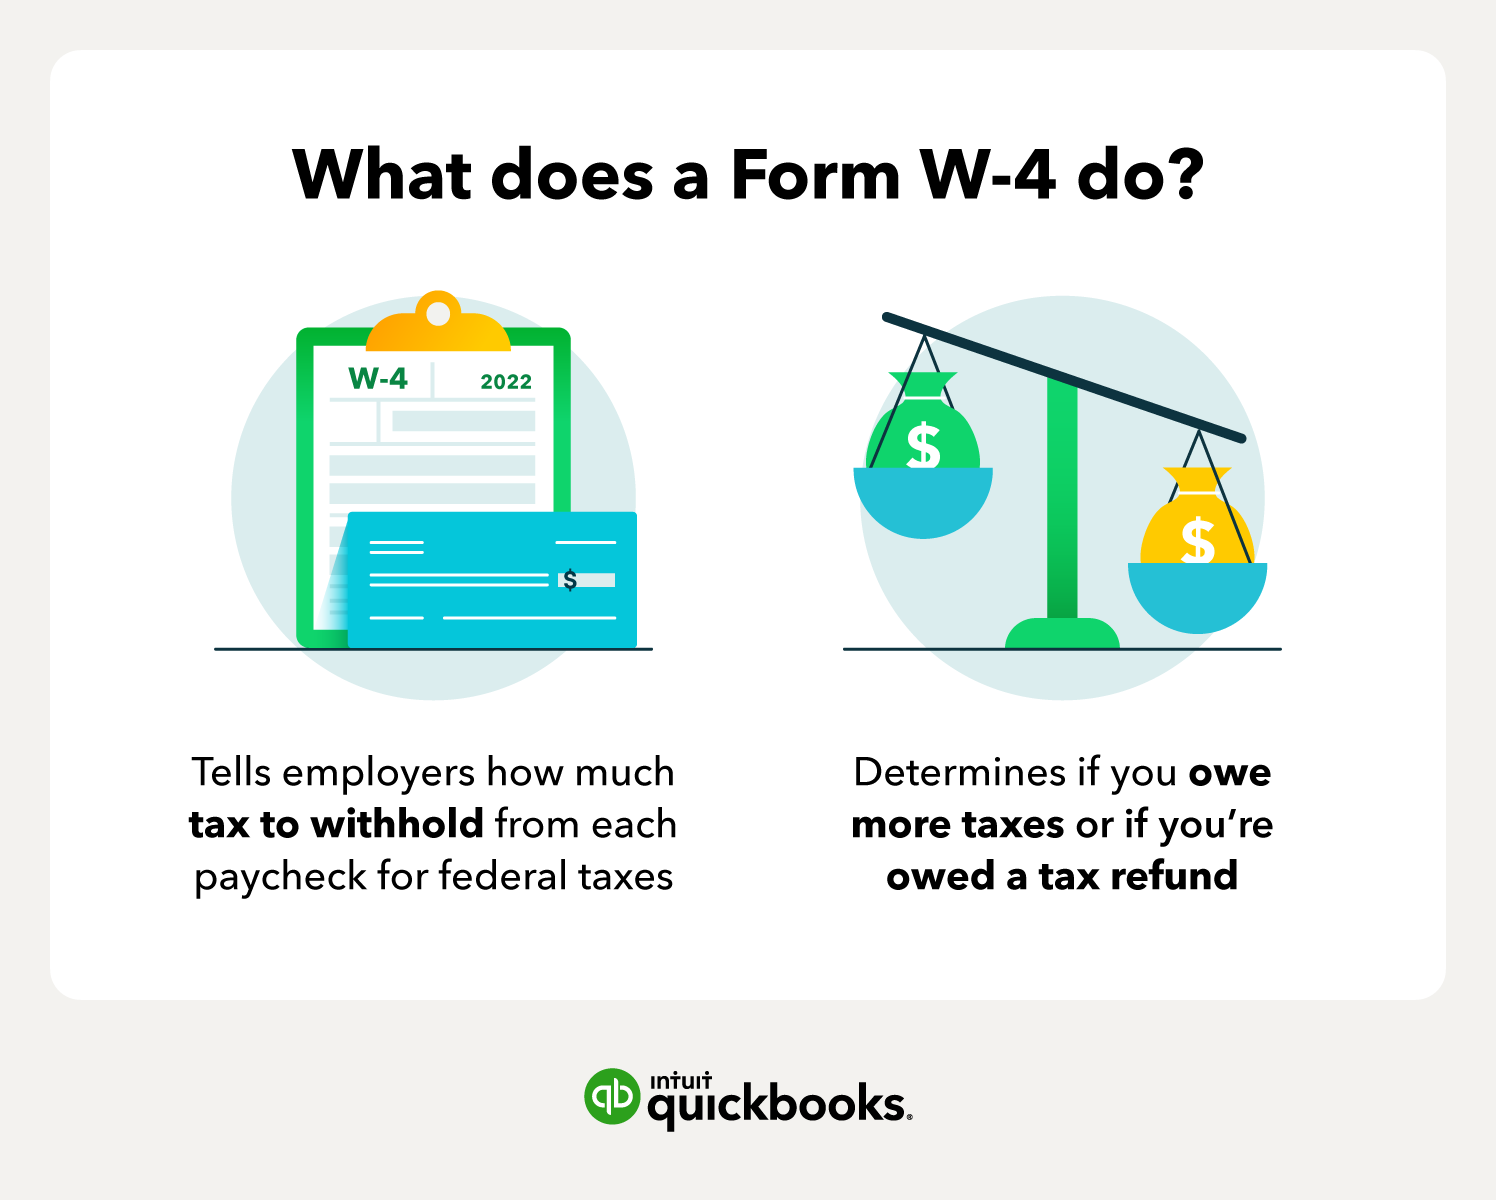 A W-4 tells employers how much tax to withhold from each paycheck for tax purposes, and determines if you owe more taxes or are owed a refund.